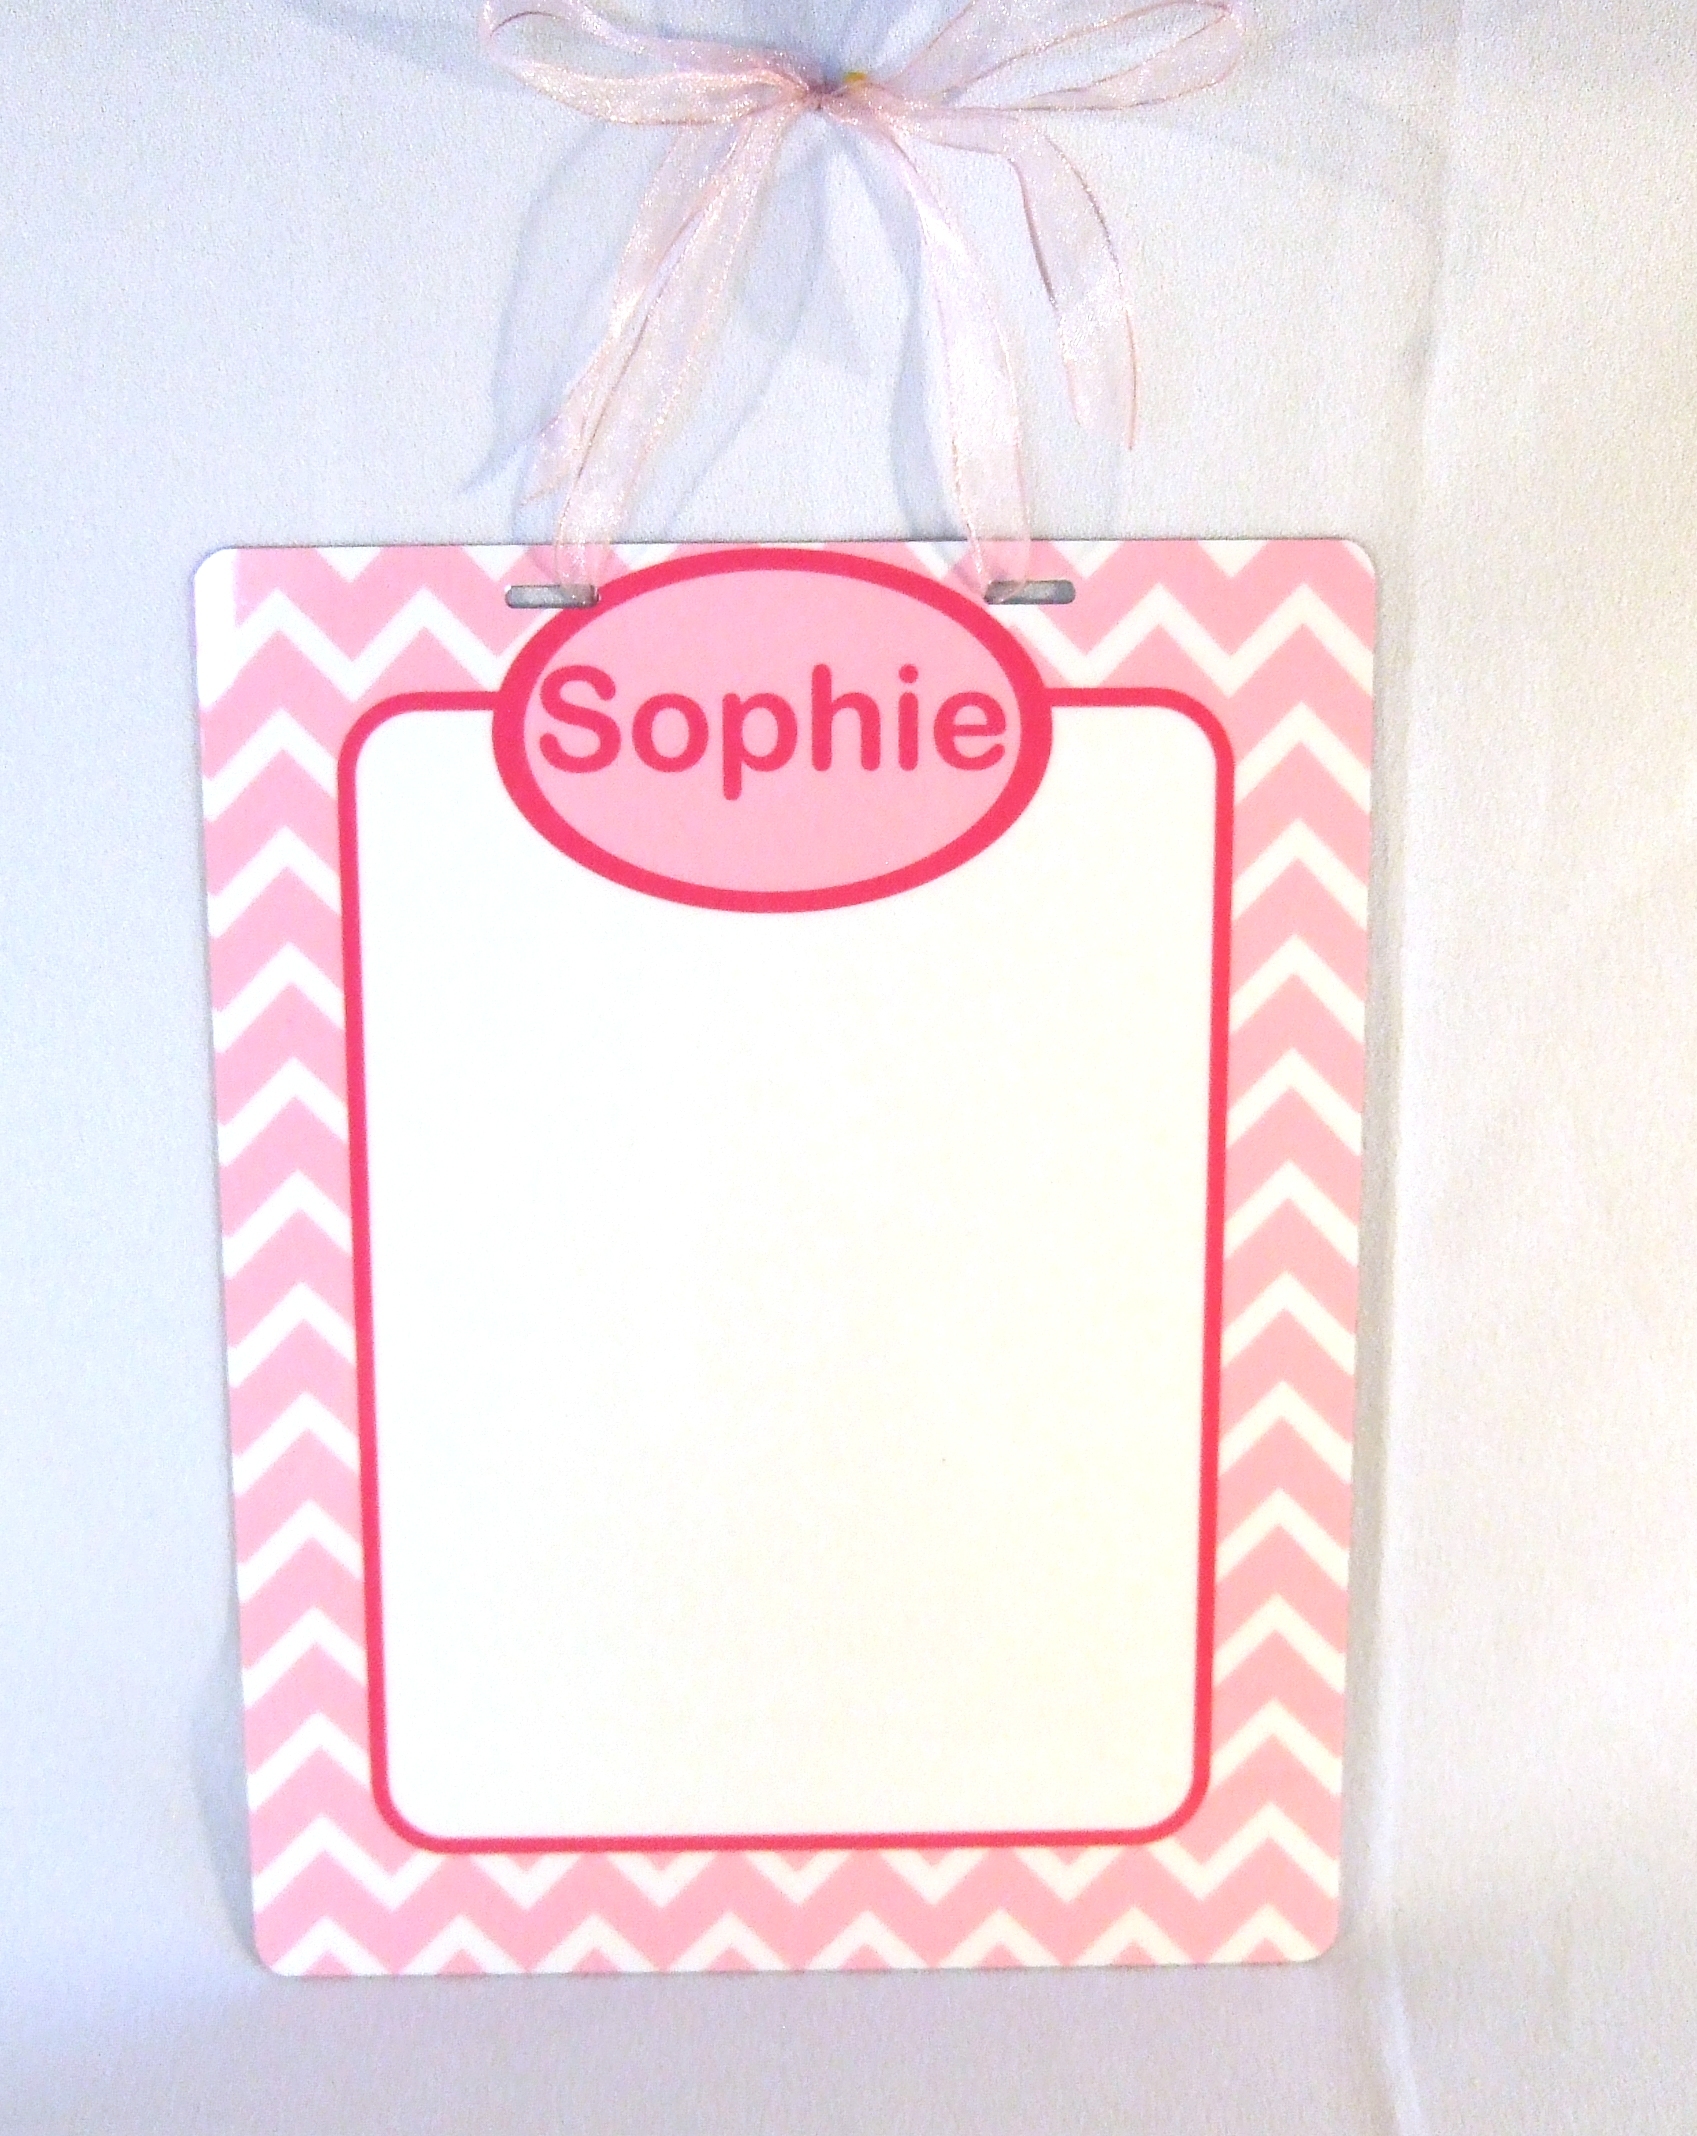  DEB1007Personalized metal dry erase board with light pink and hot pink chevron pattern and hot pink trim